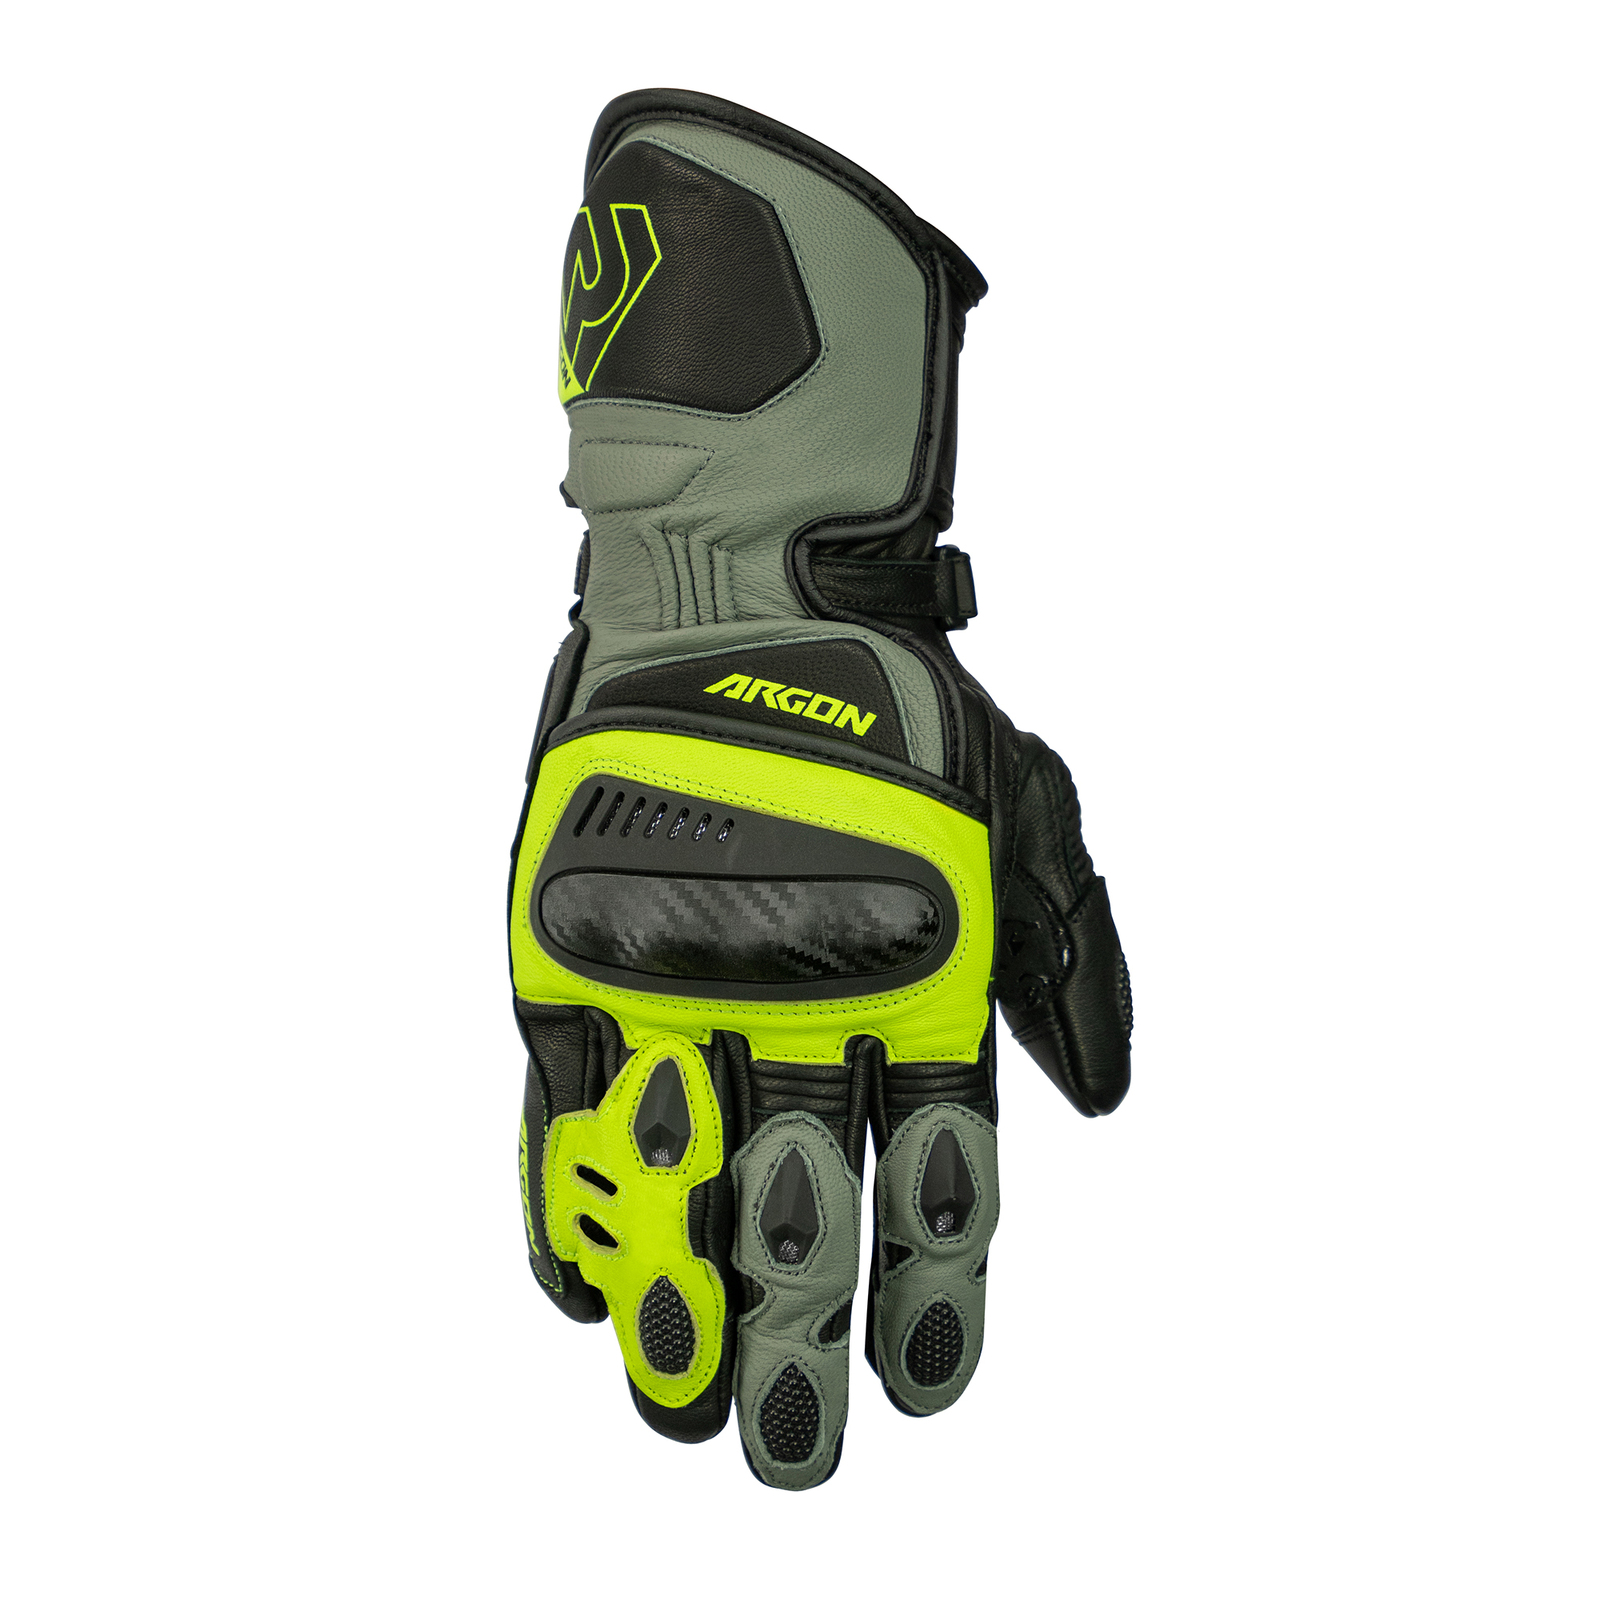 ARGON ENGAGE GLOVE GRY LIME/S.